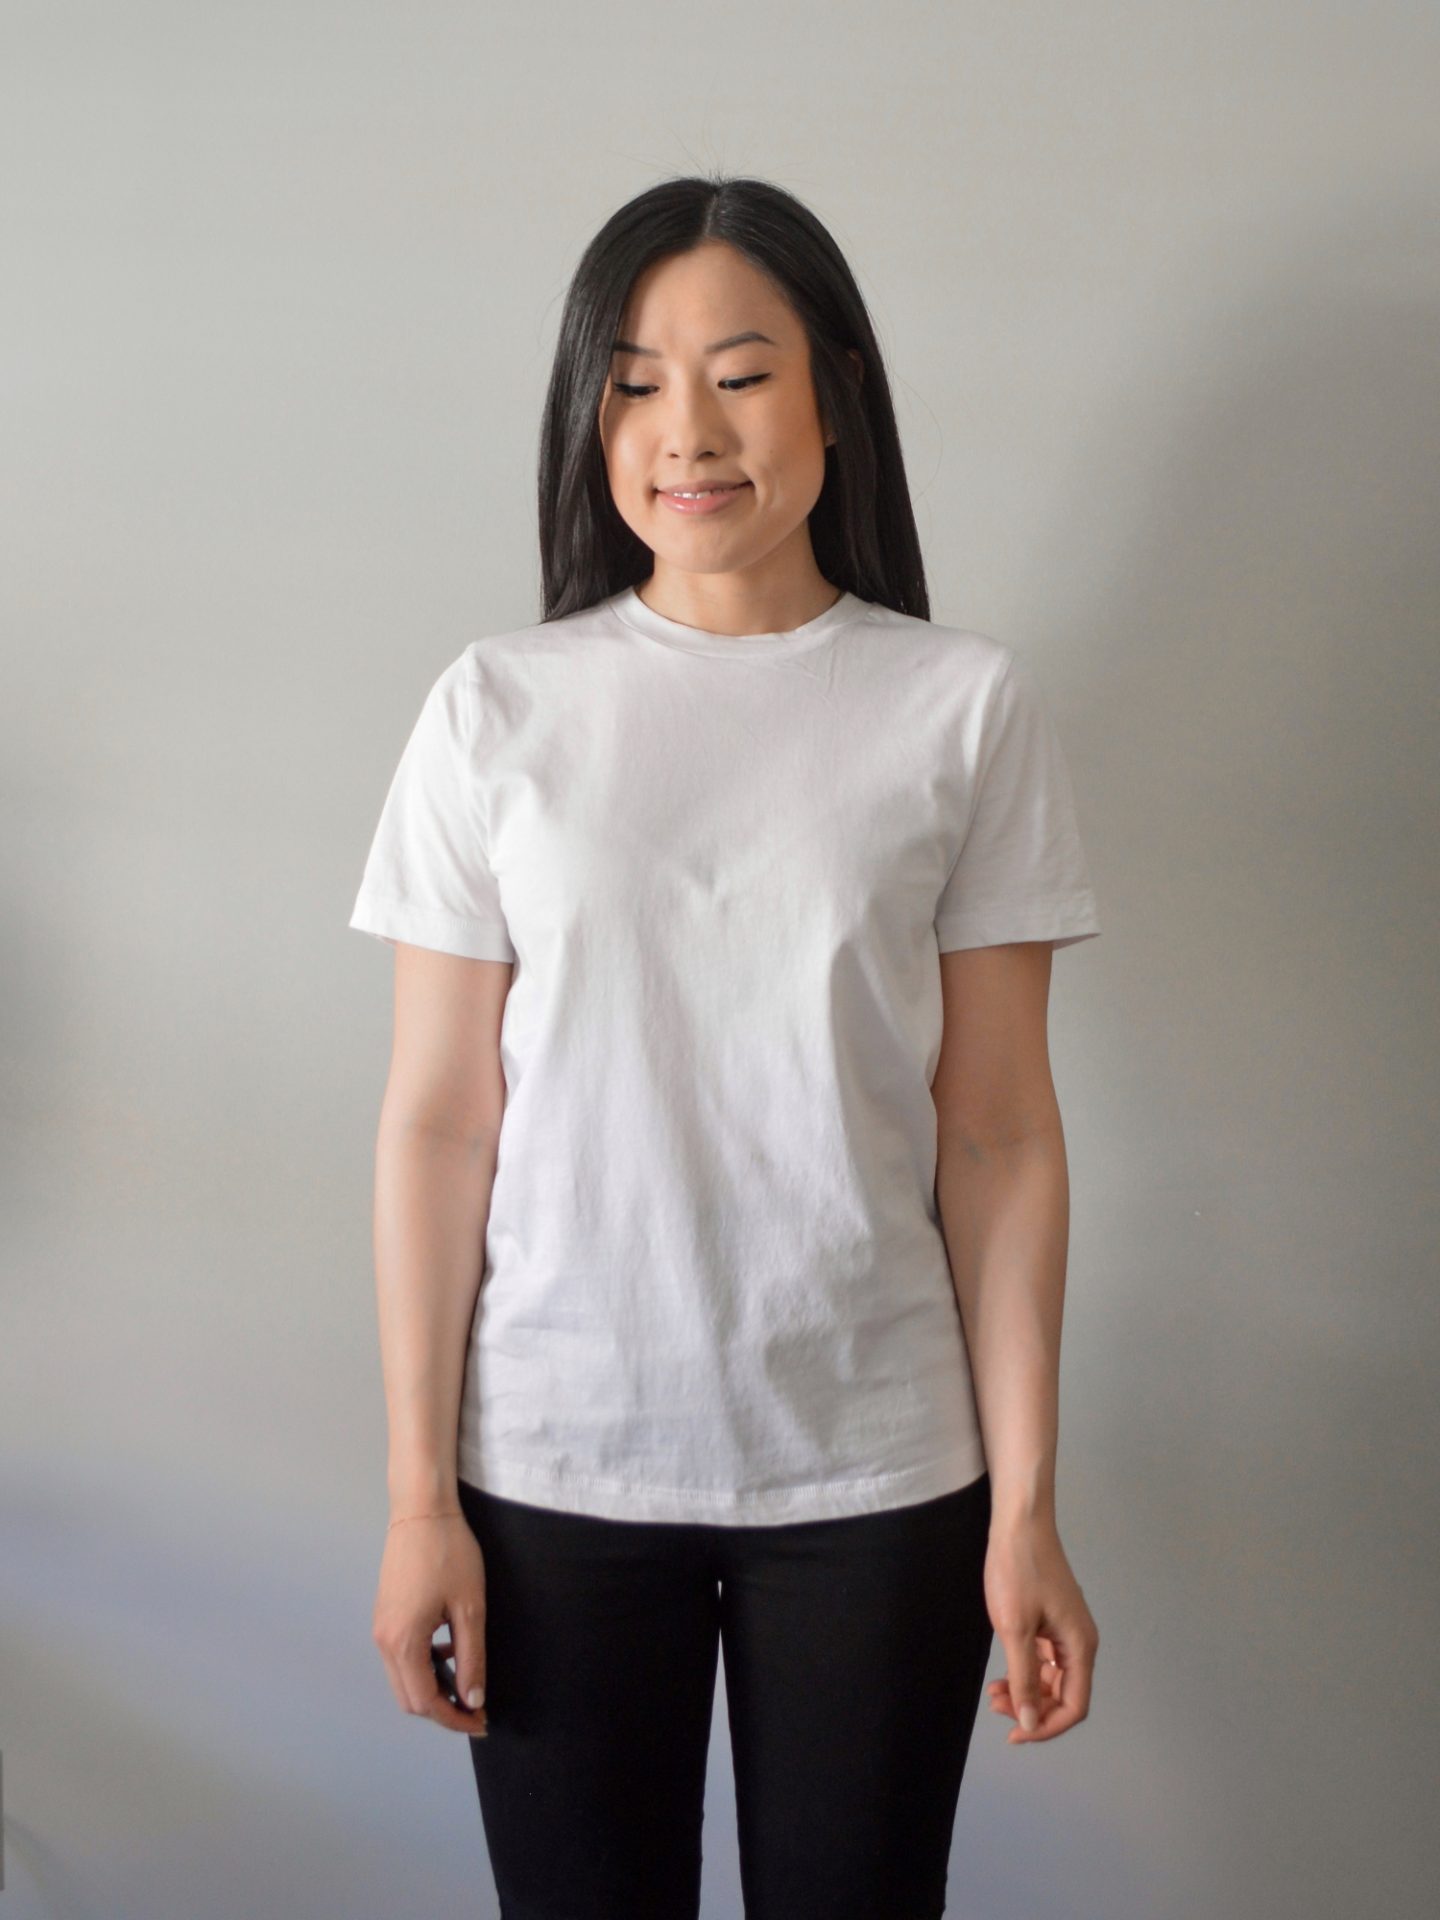 The Essential T-Shirt in Bright White